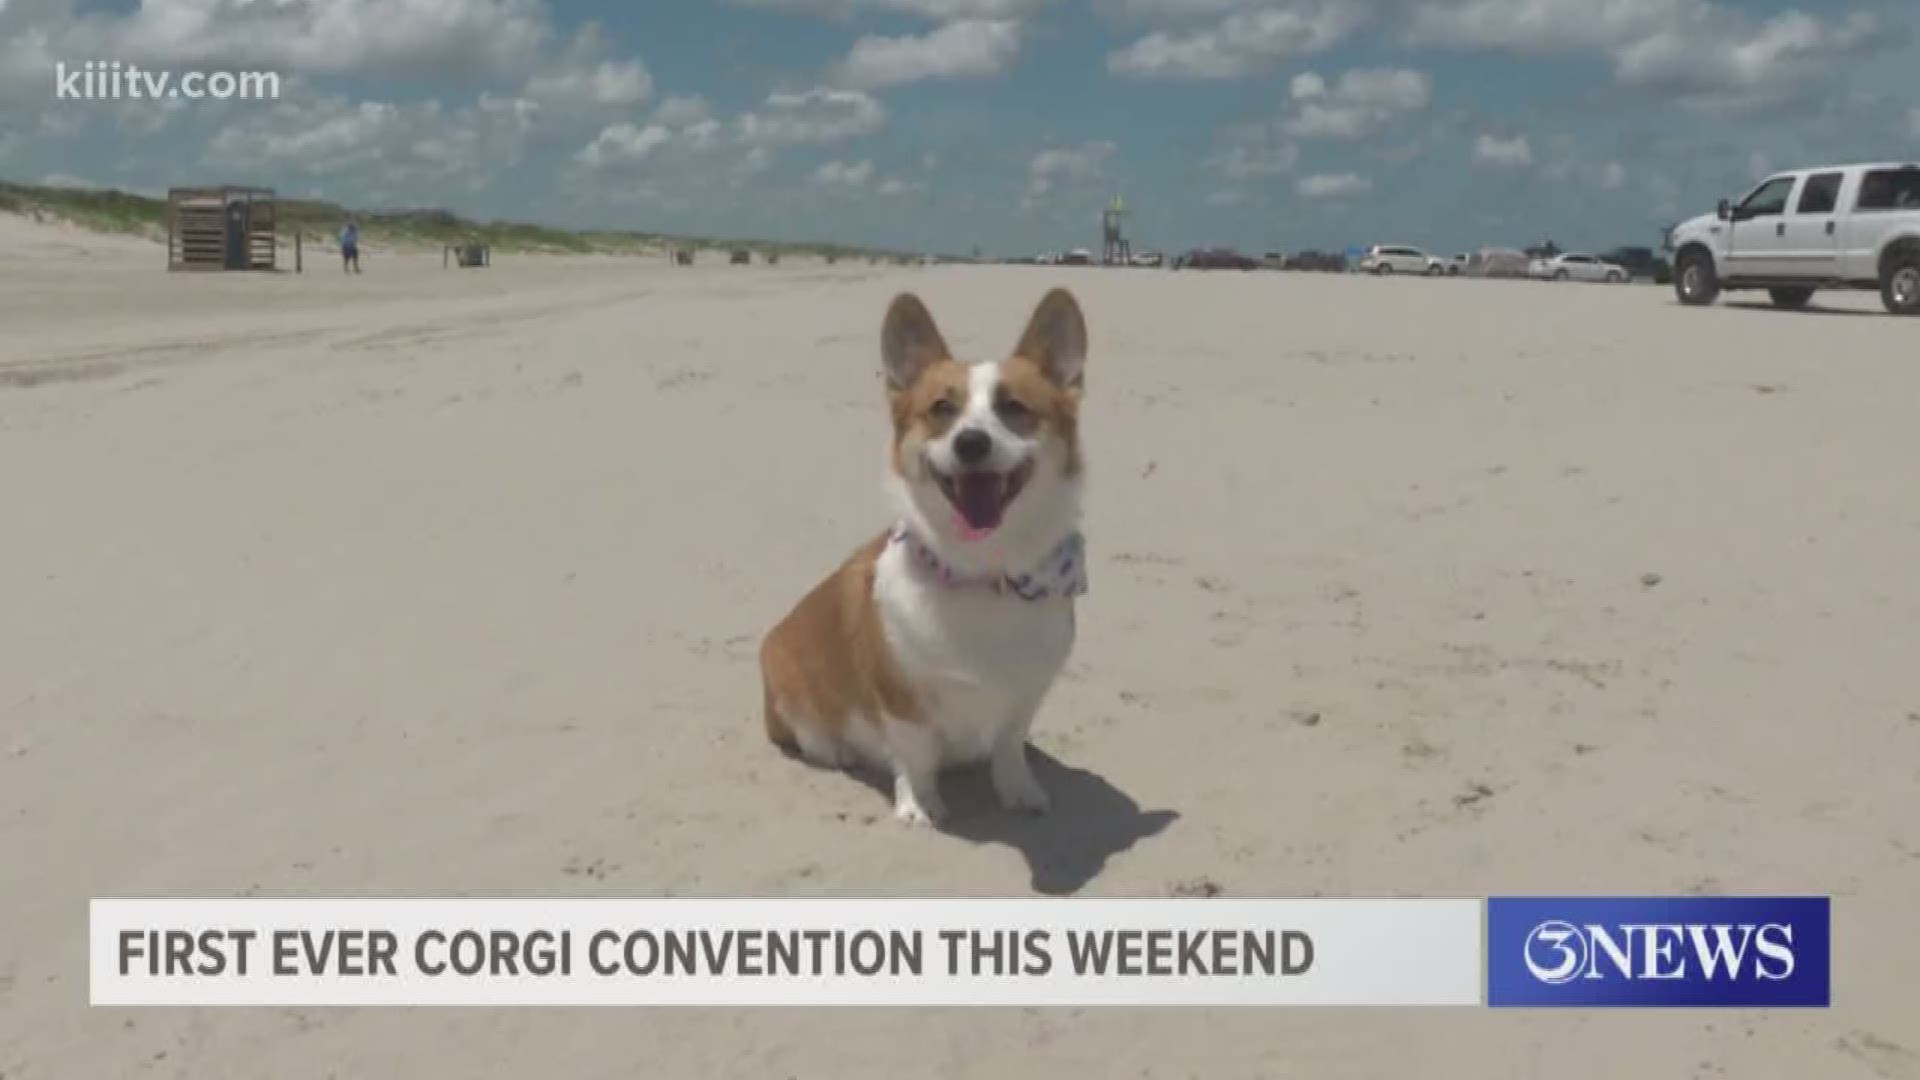 Coastal Bend residents can enjoy the convention even if they do not own a corgi.